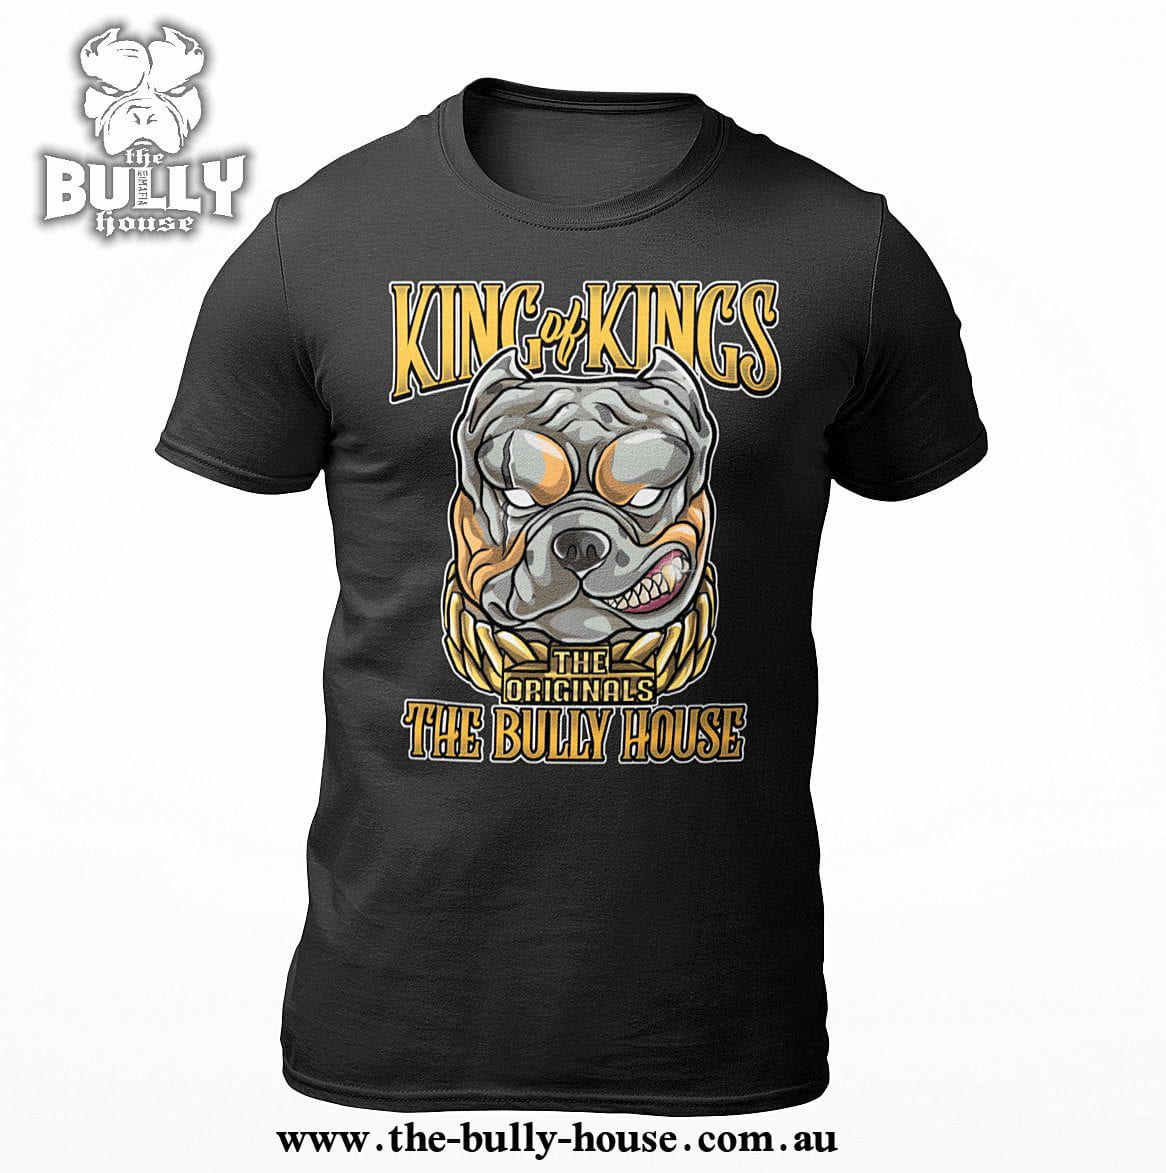 KING OF KINGS - T Shirt - Gold Edition - Black T-MENS or UNISEX